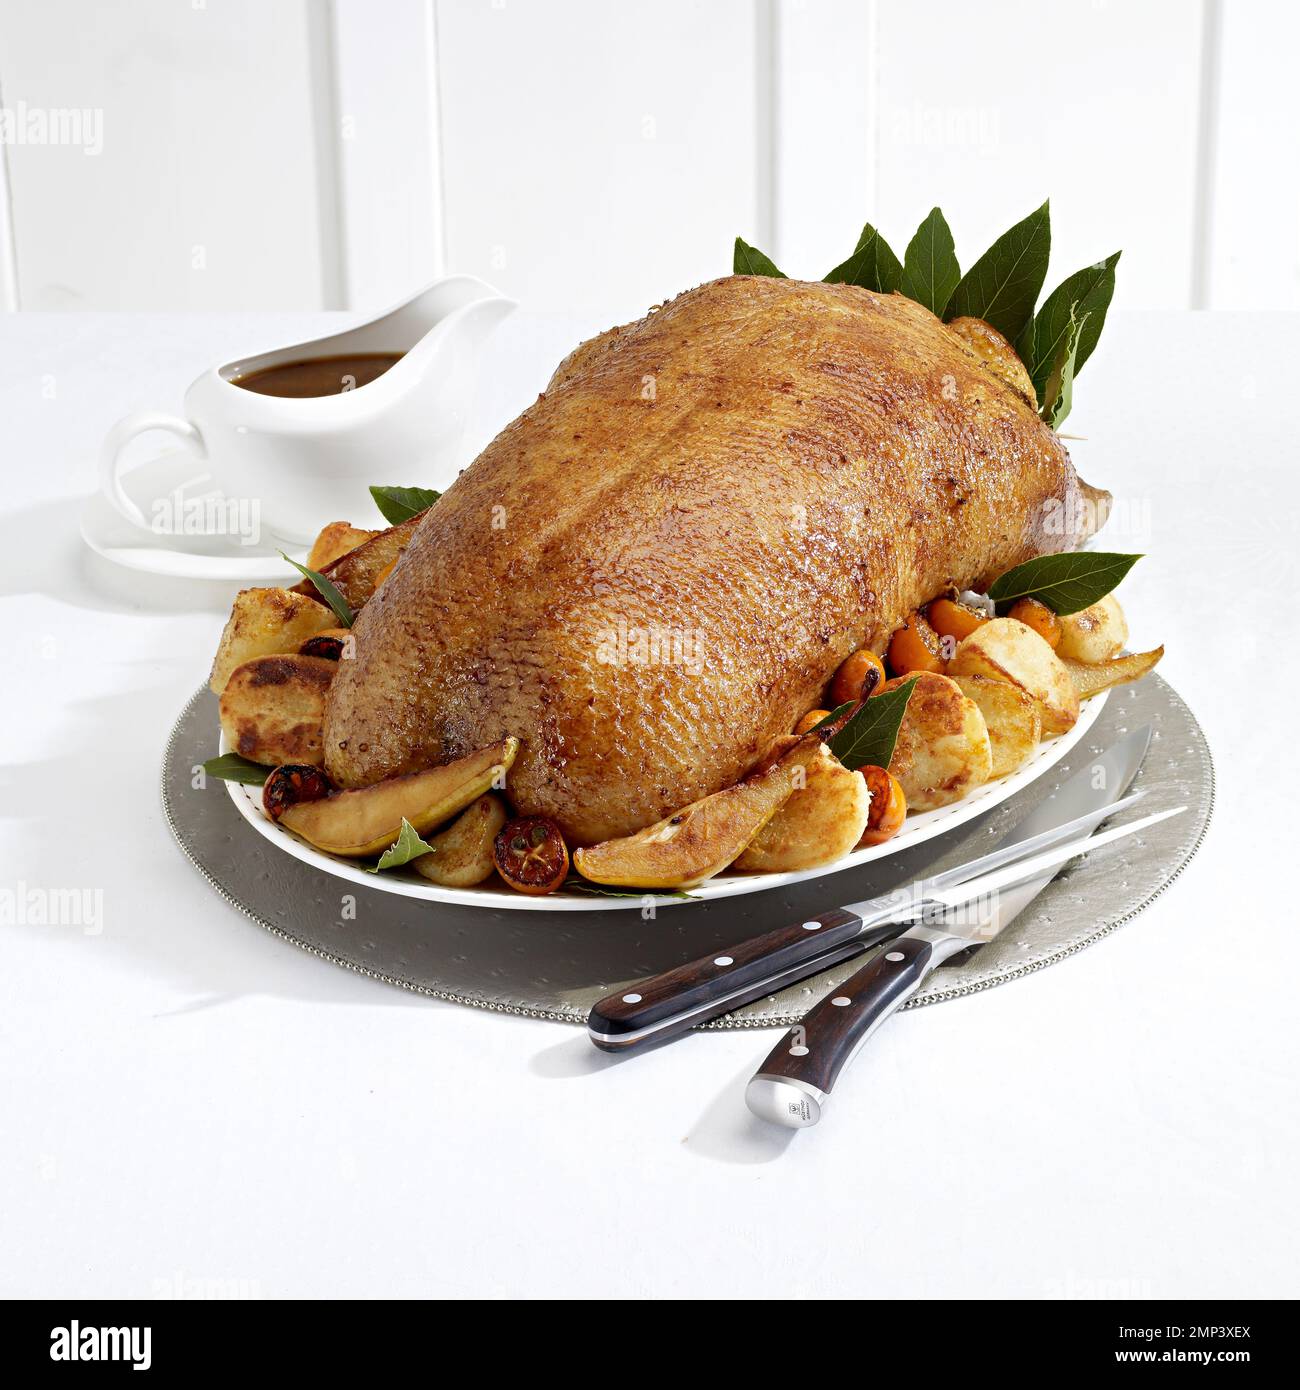 goose, poultry, cooked, delicious, dish, lunch, roast, gourmet, tasty, rustic, baked, cooking, crispy, tra Stock Photo